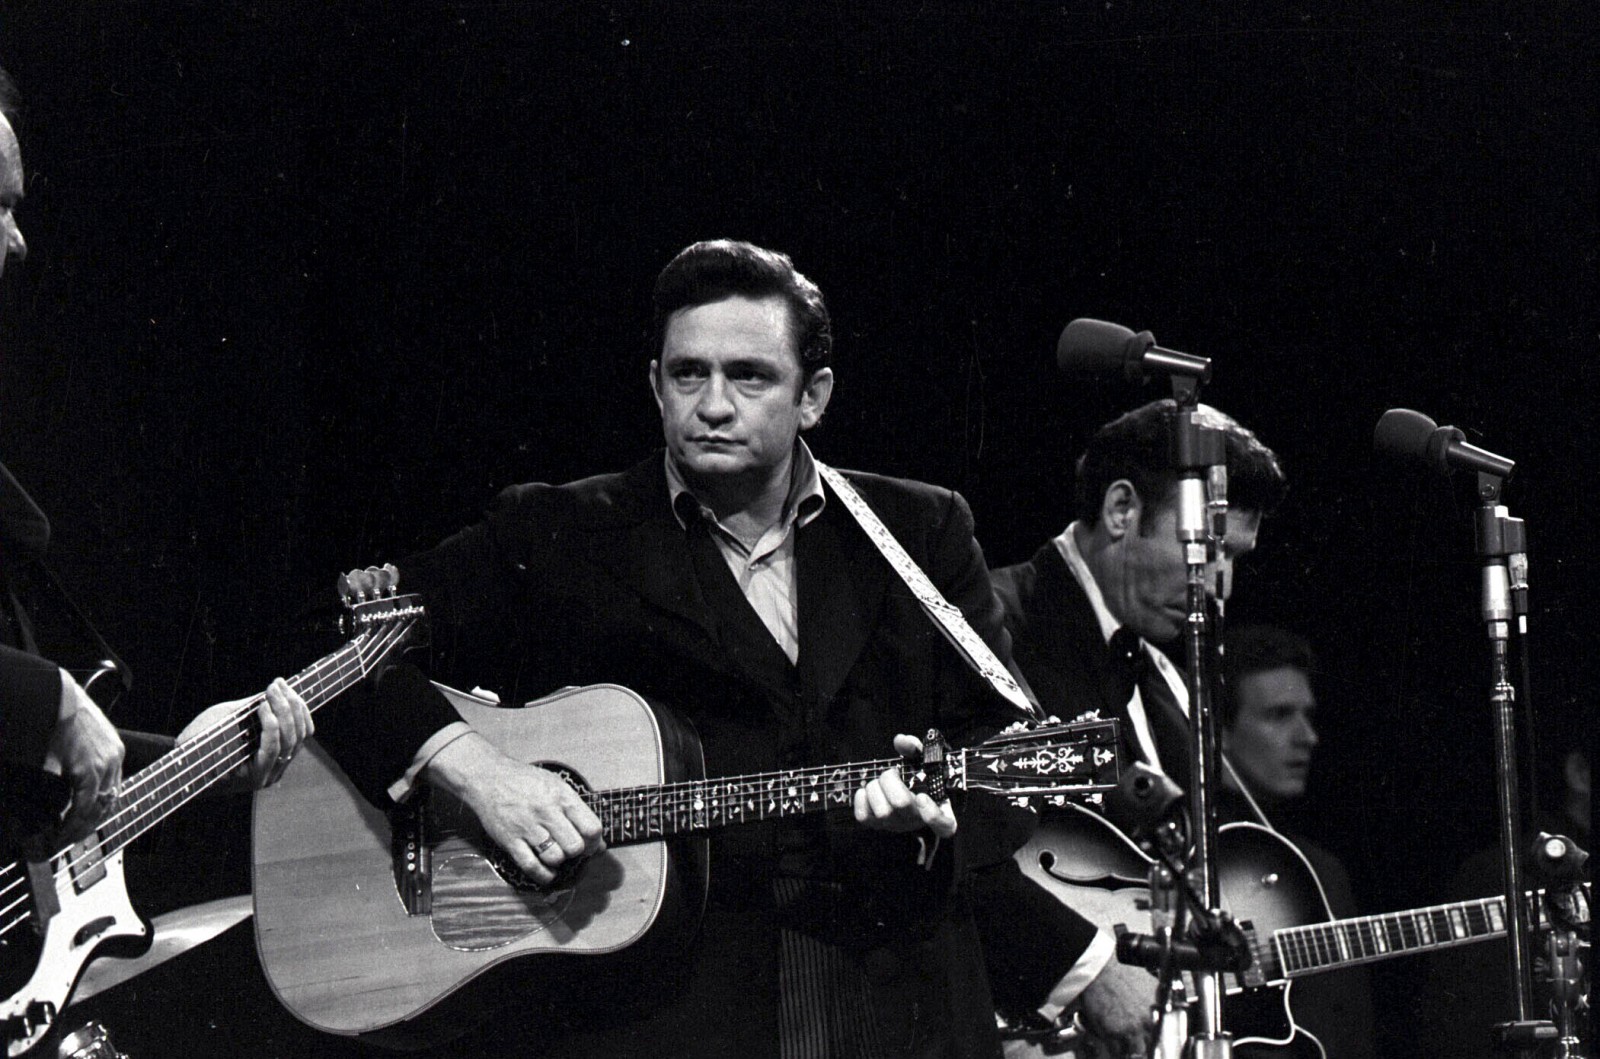 FEATURES: Today marks 10 years since the death of Johnny Cash